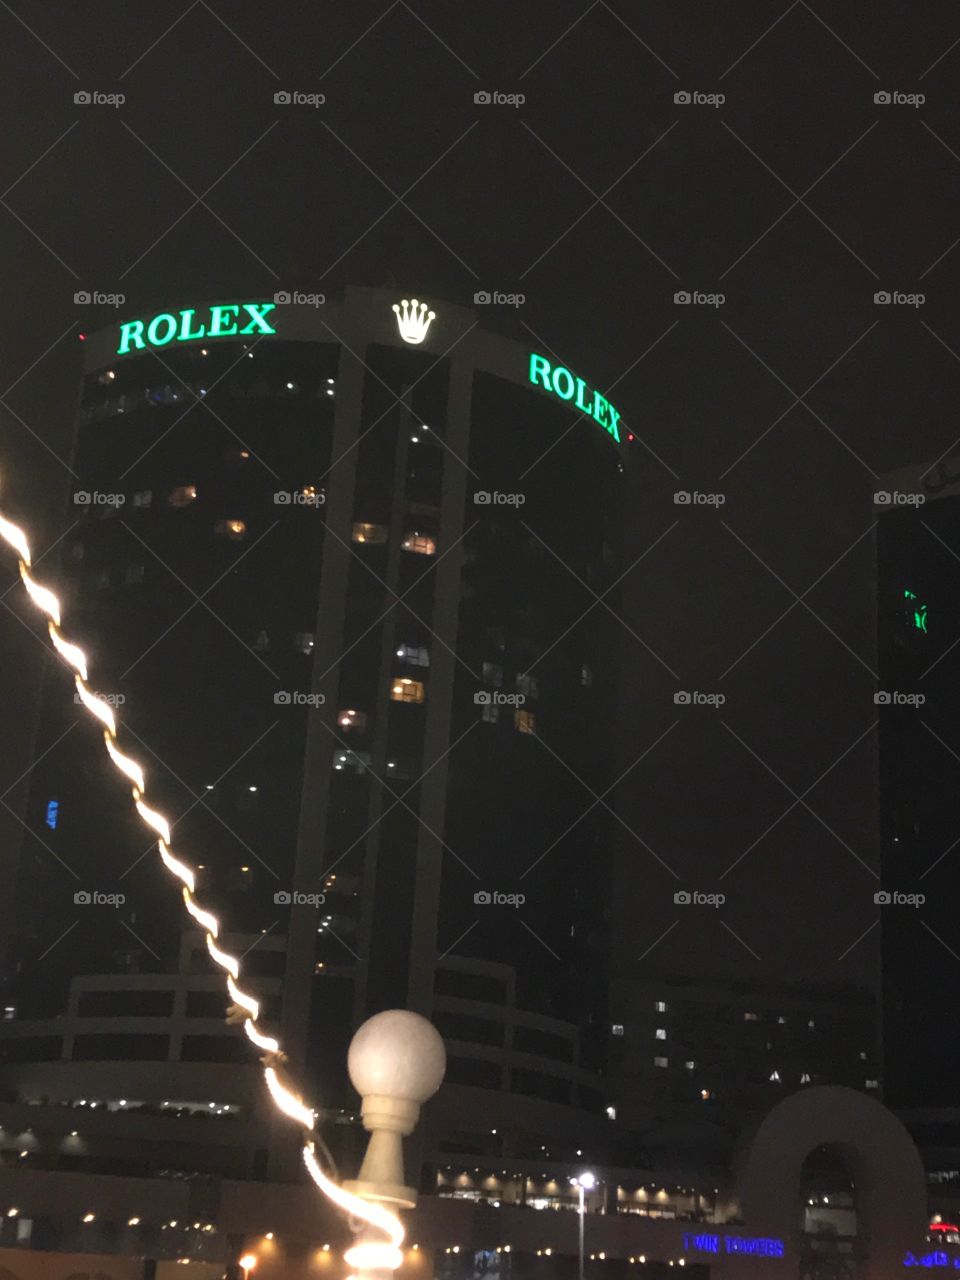 A night view of the Rolex Tower Dubai £20.00. 